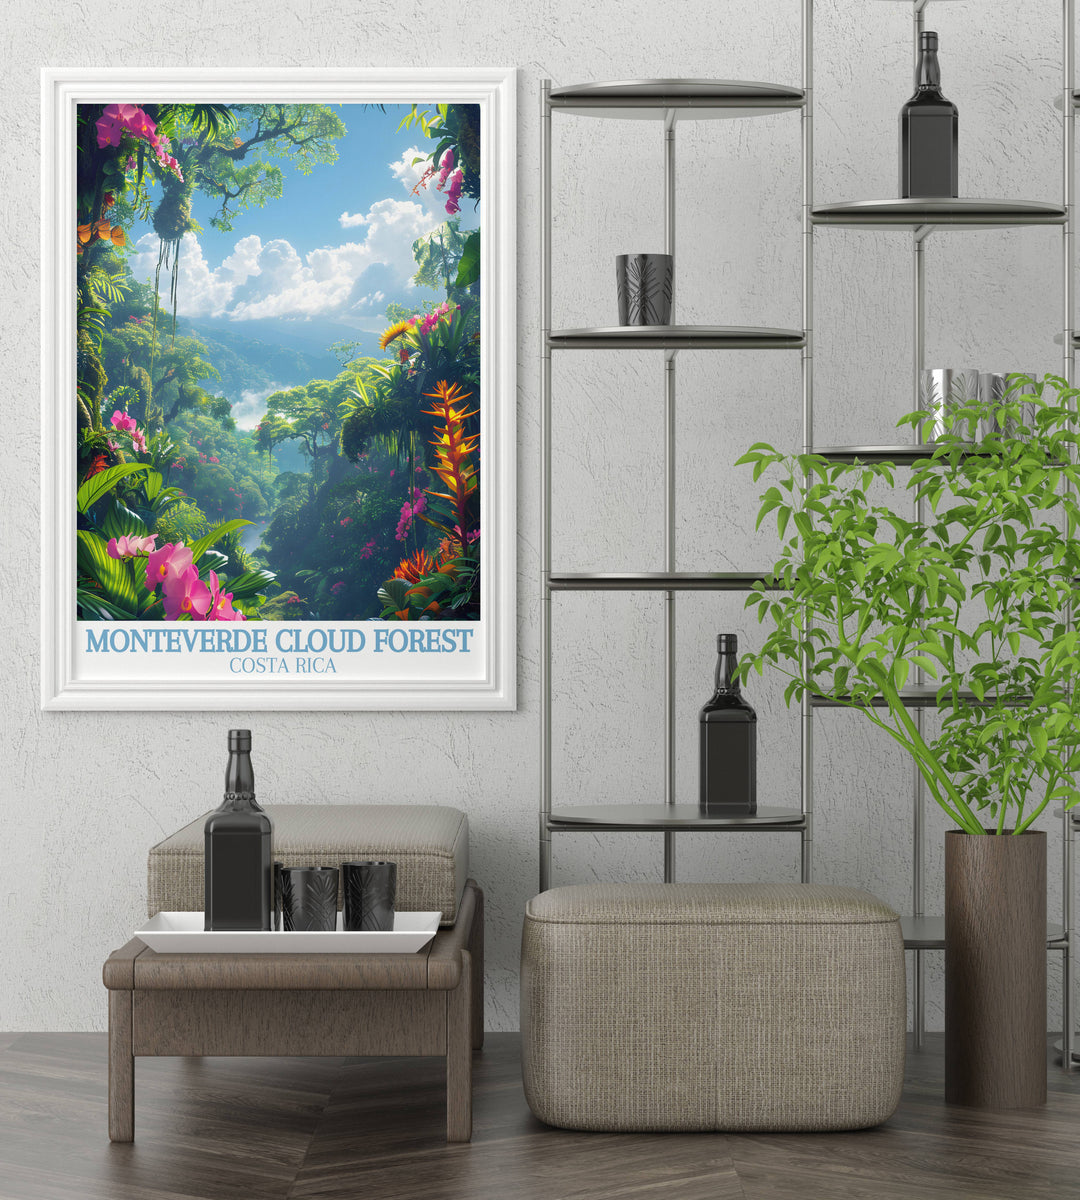 Artistic print of a quetzal perched in the Monteverde Cloud Forest, illustrating the vivid colors and life in the clouds.